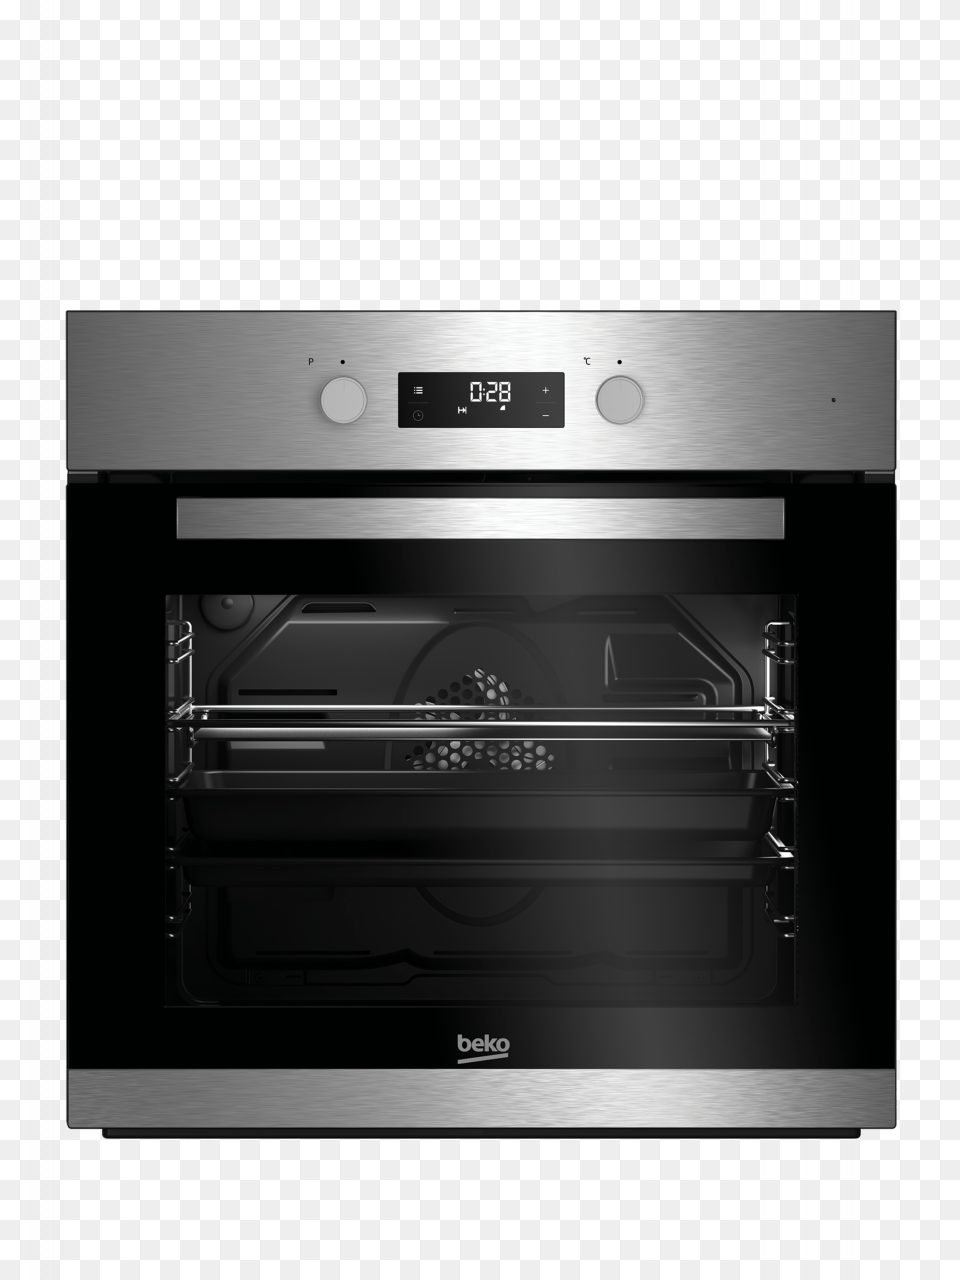 Microwave, Appliance, Device, Electrical Device, Oven Png